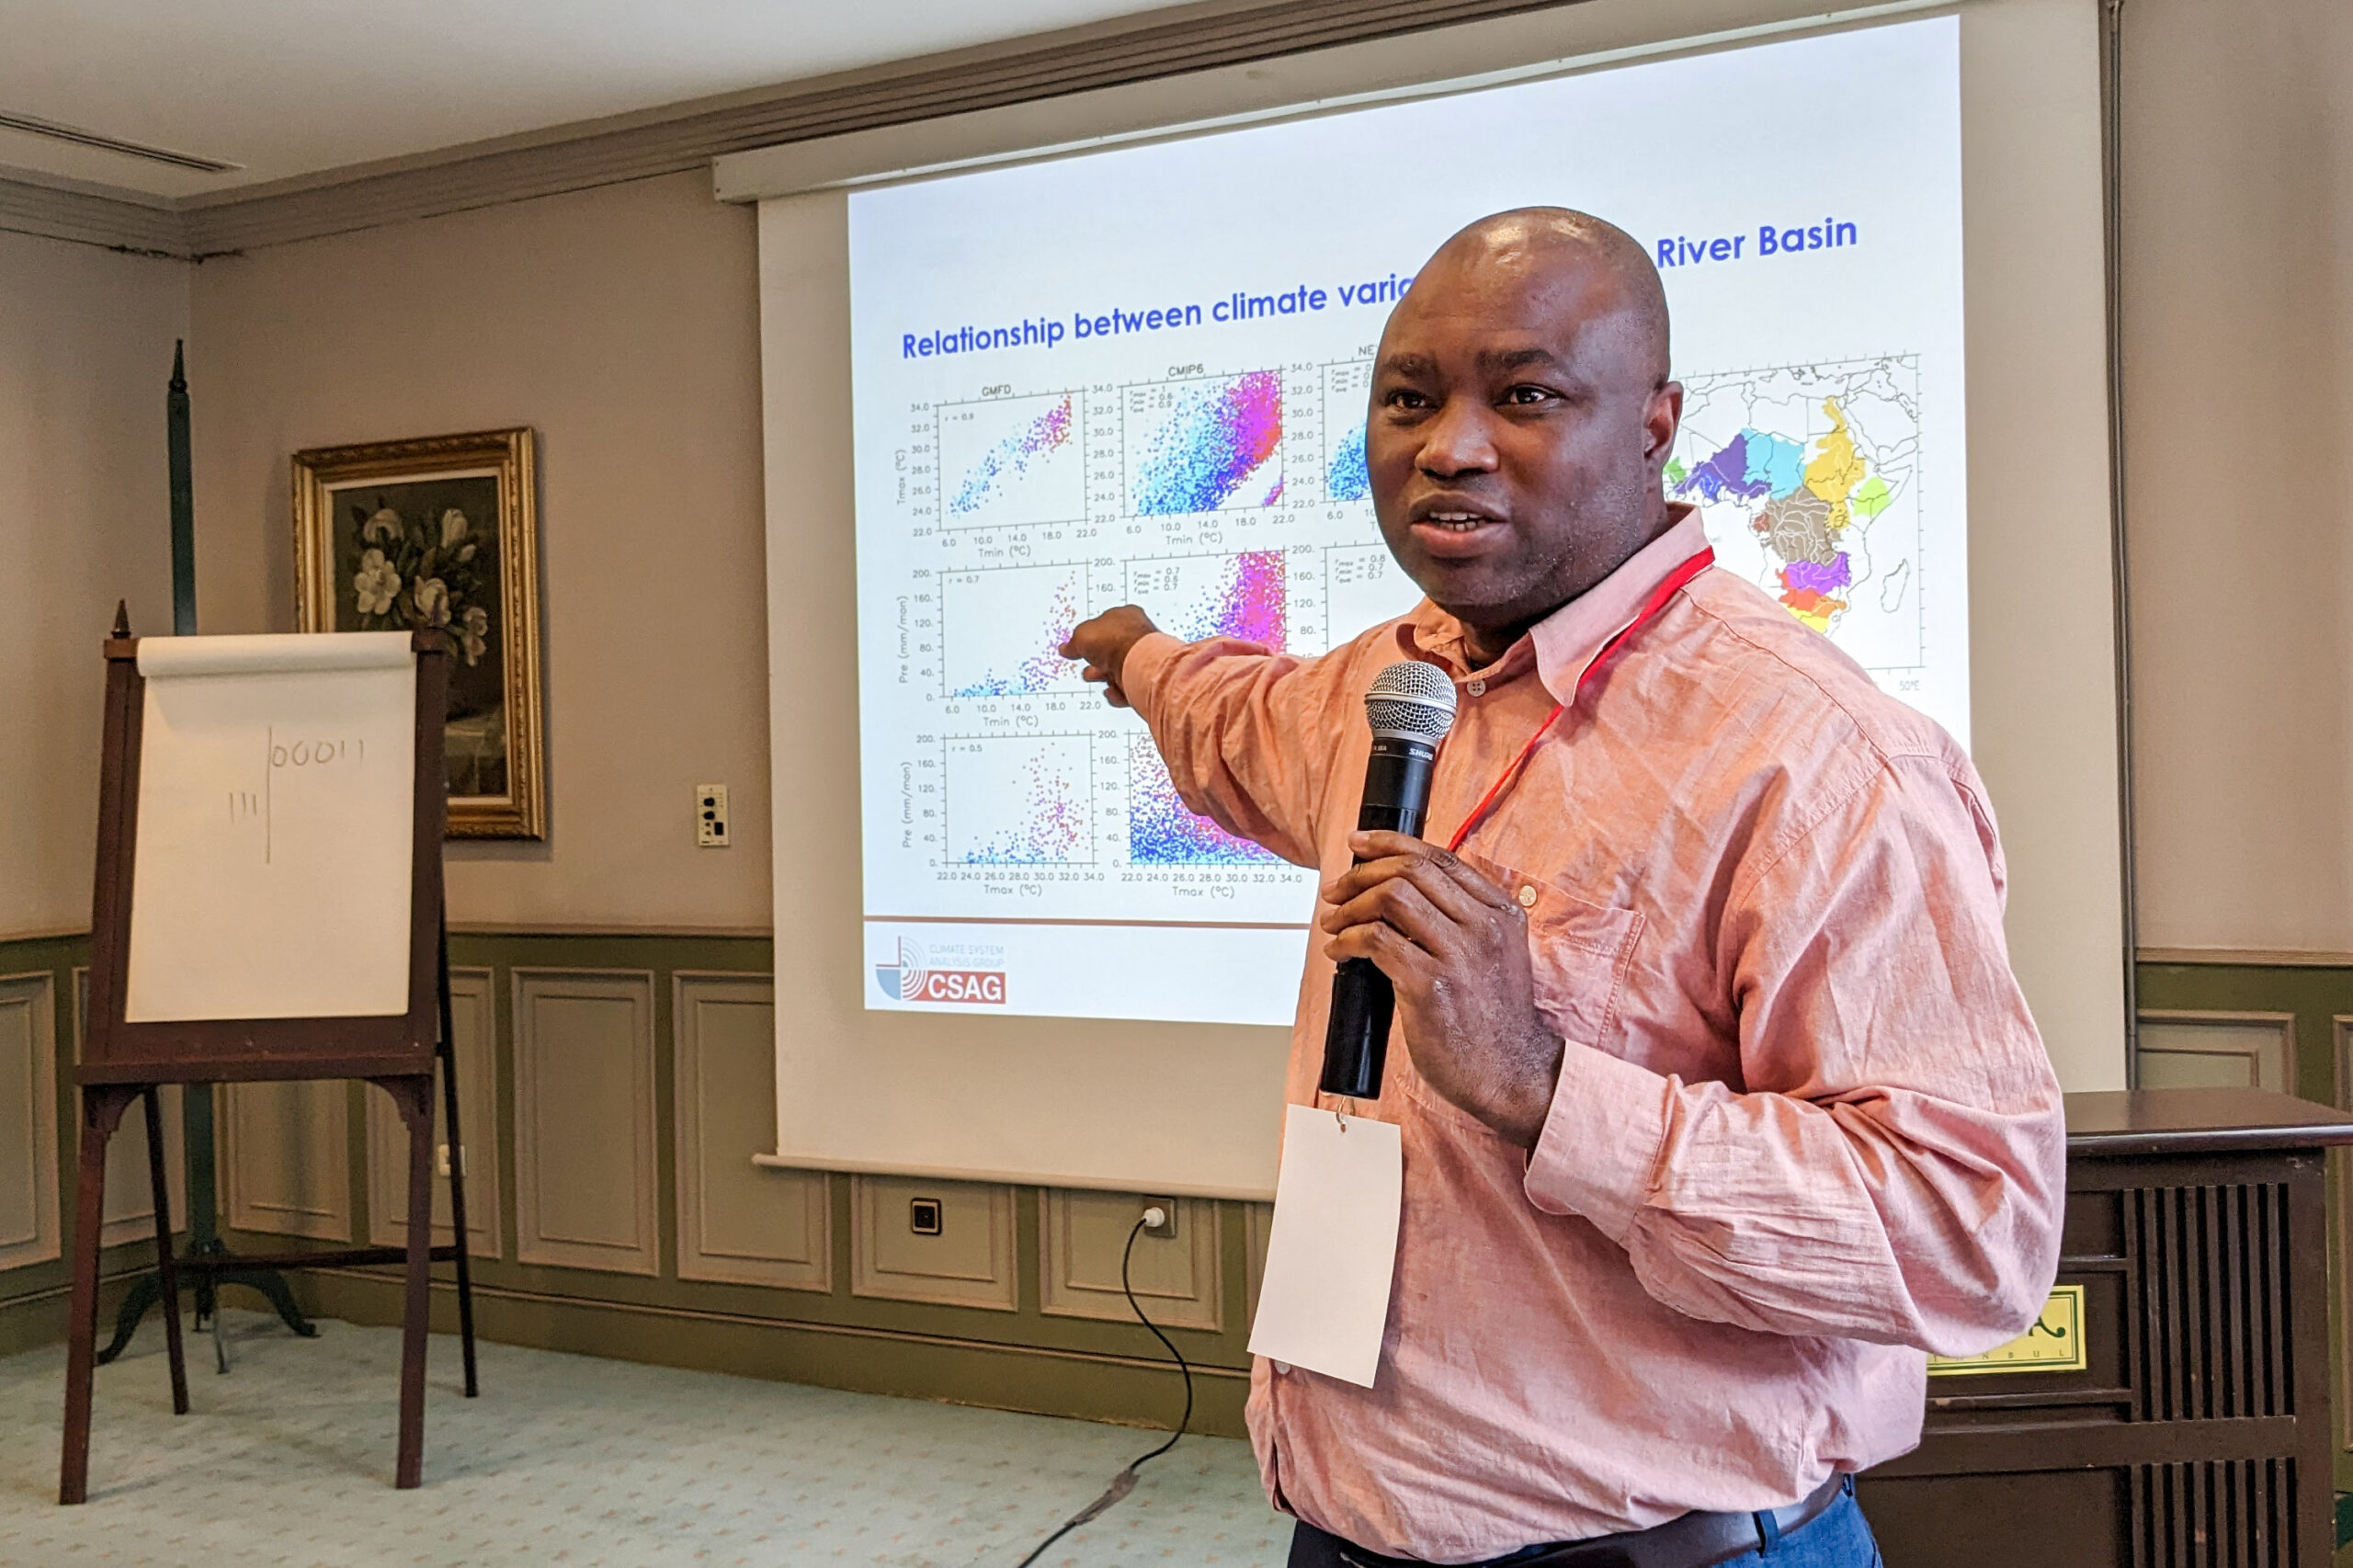 Professor Abiodun holds a microphone and points back toward climate statistics projected on the screen behind him